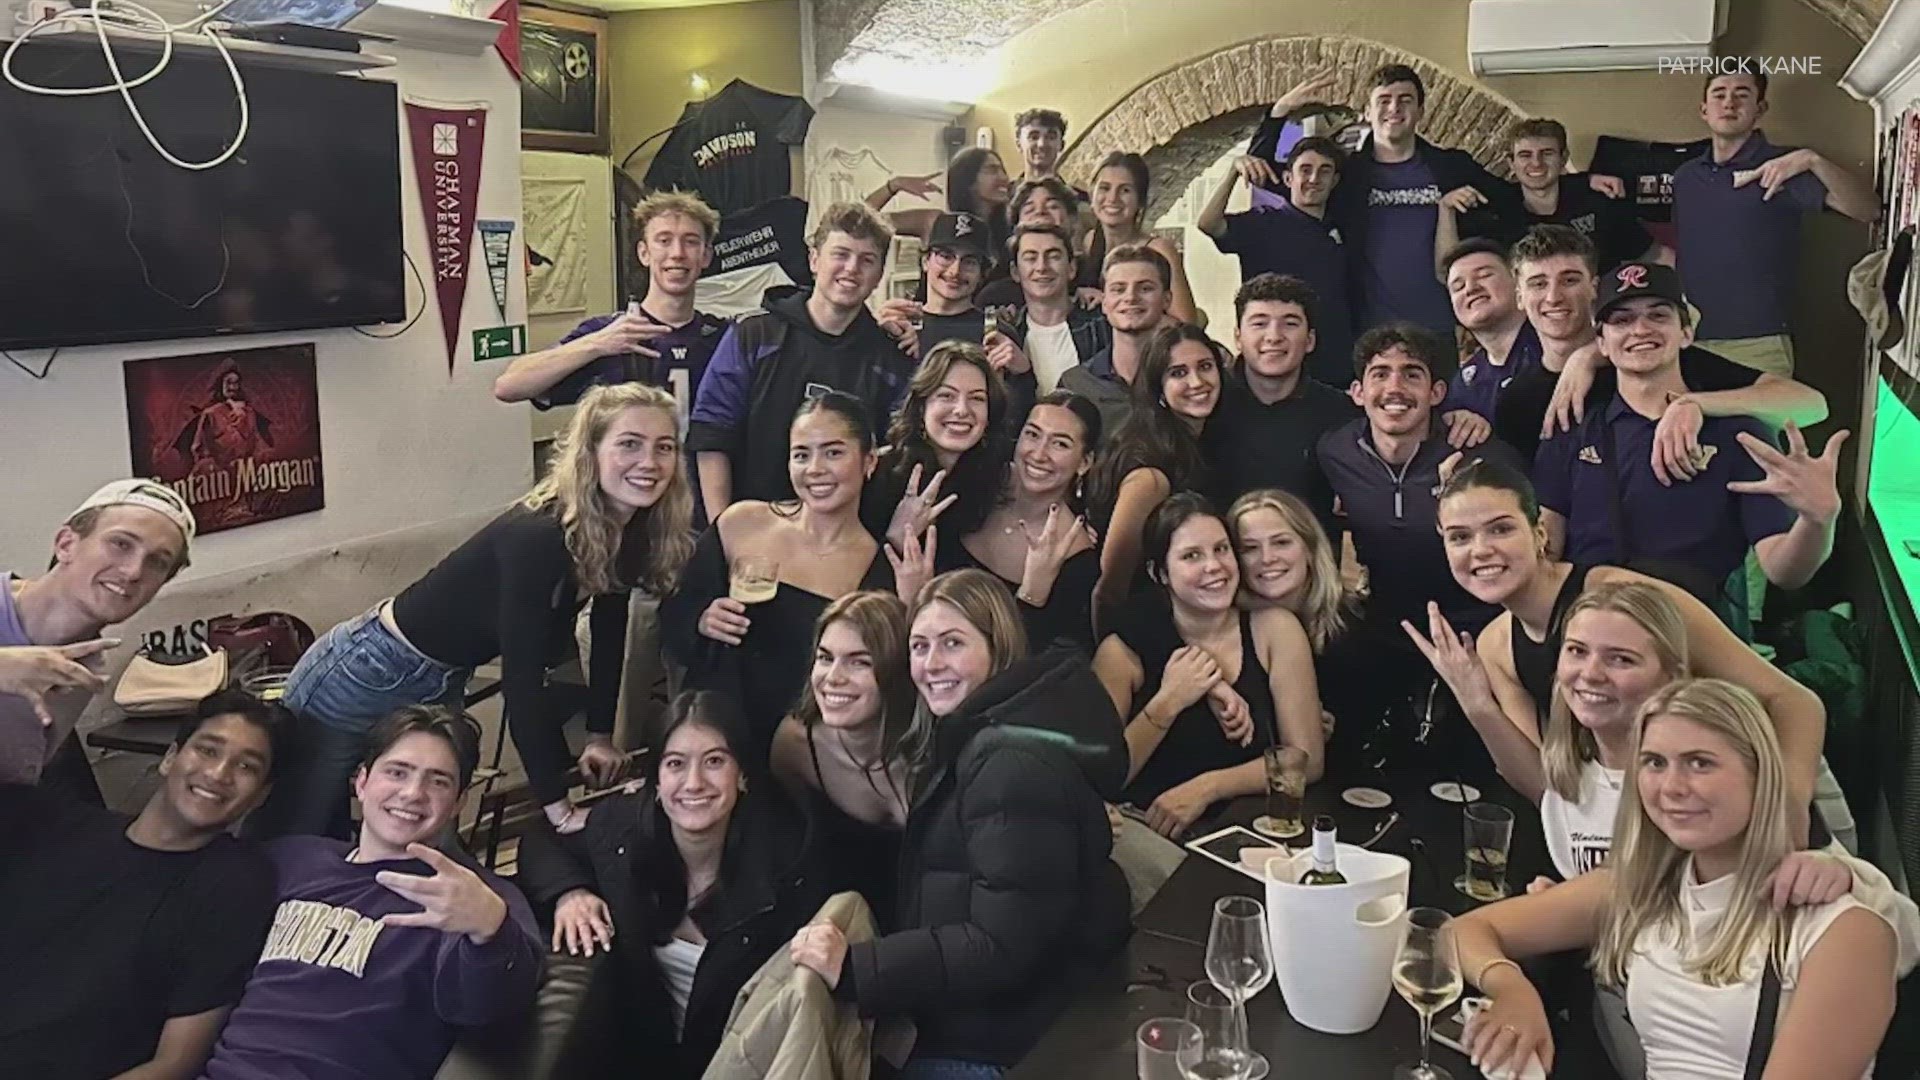 University of Washington students studying abroad in Rome are hosting watch parties for fellow Huskies to cheer their team on